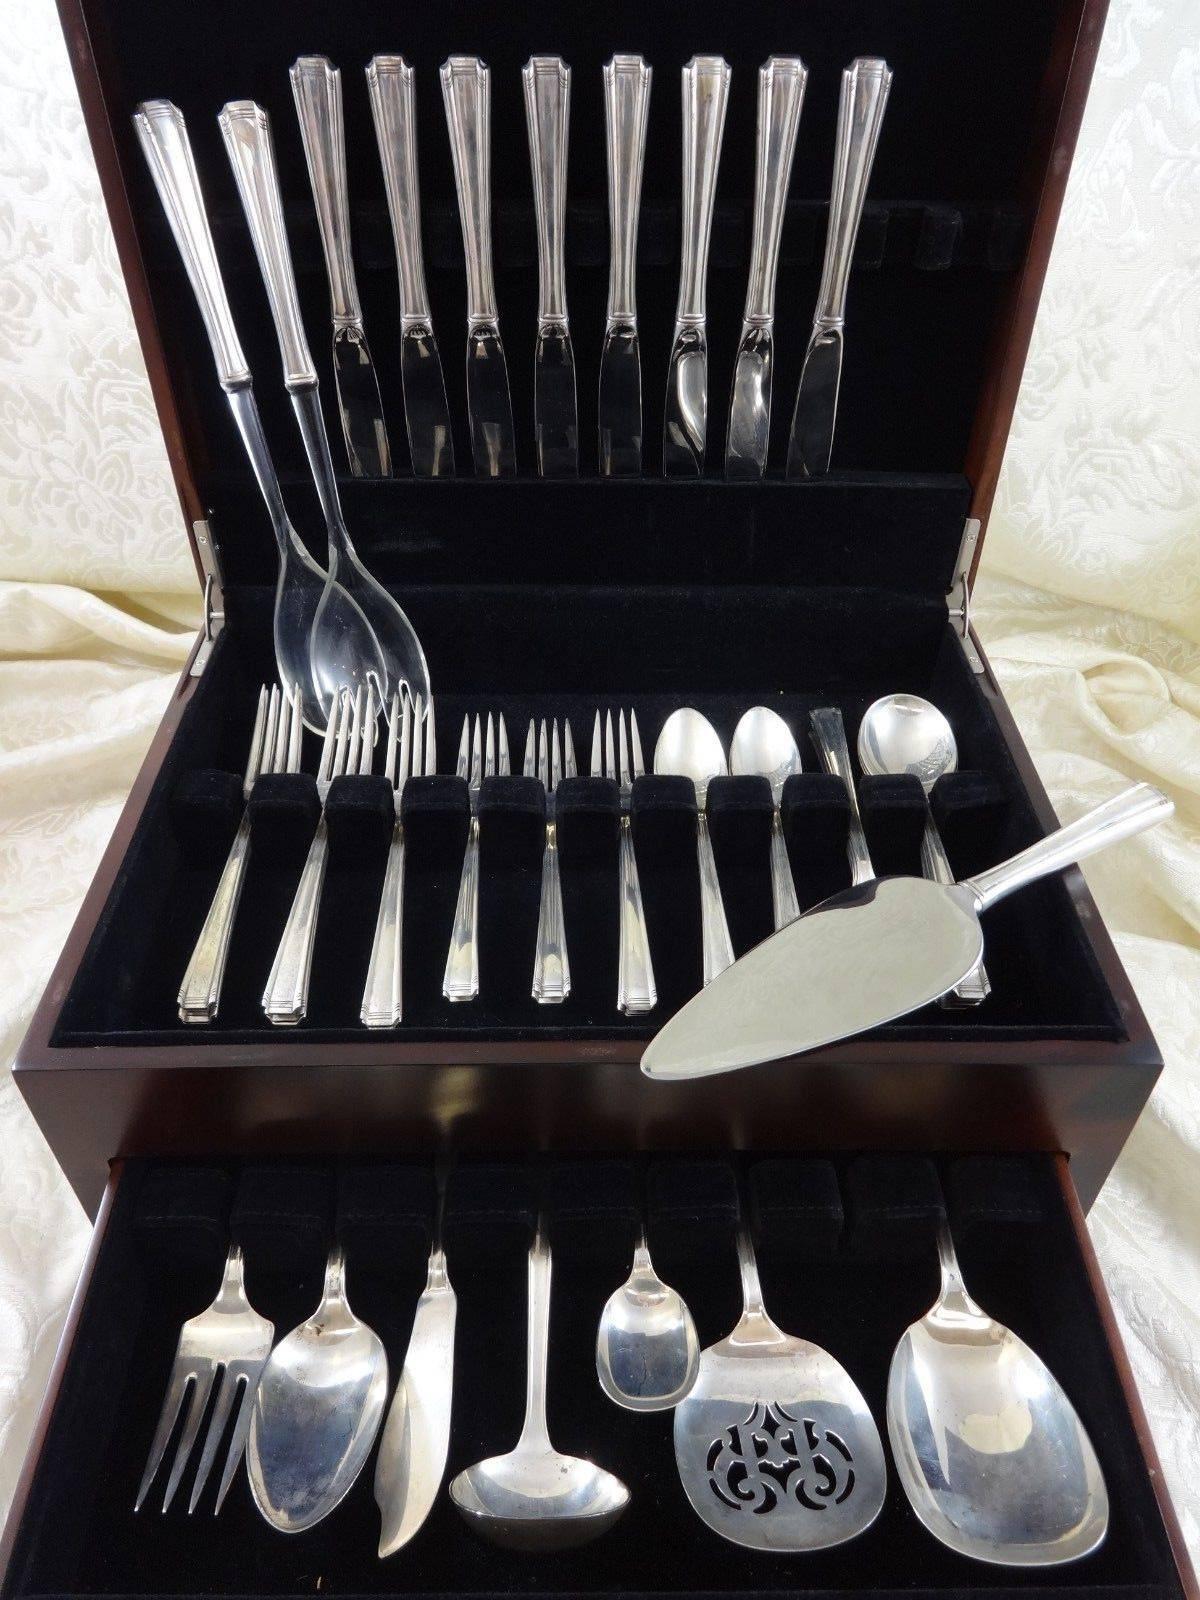 John & Priscilla by Westmorland sterling silver flatware set of 50 pieces. This set includes:

Eight knives, 9